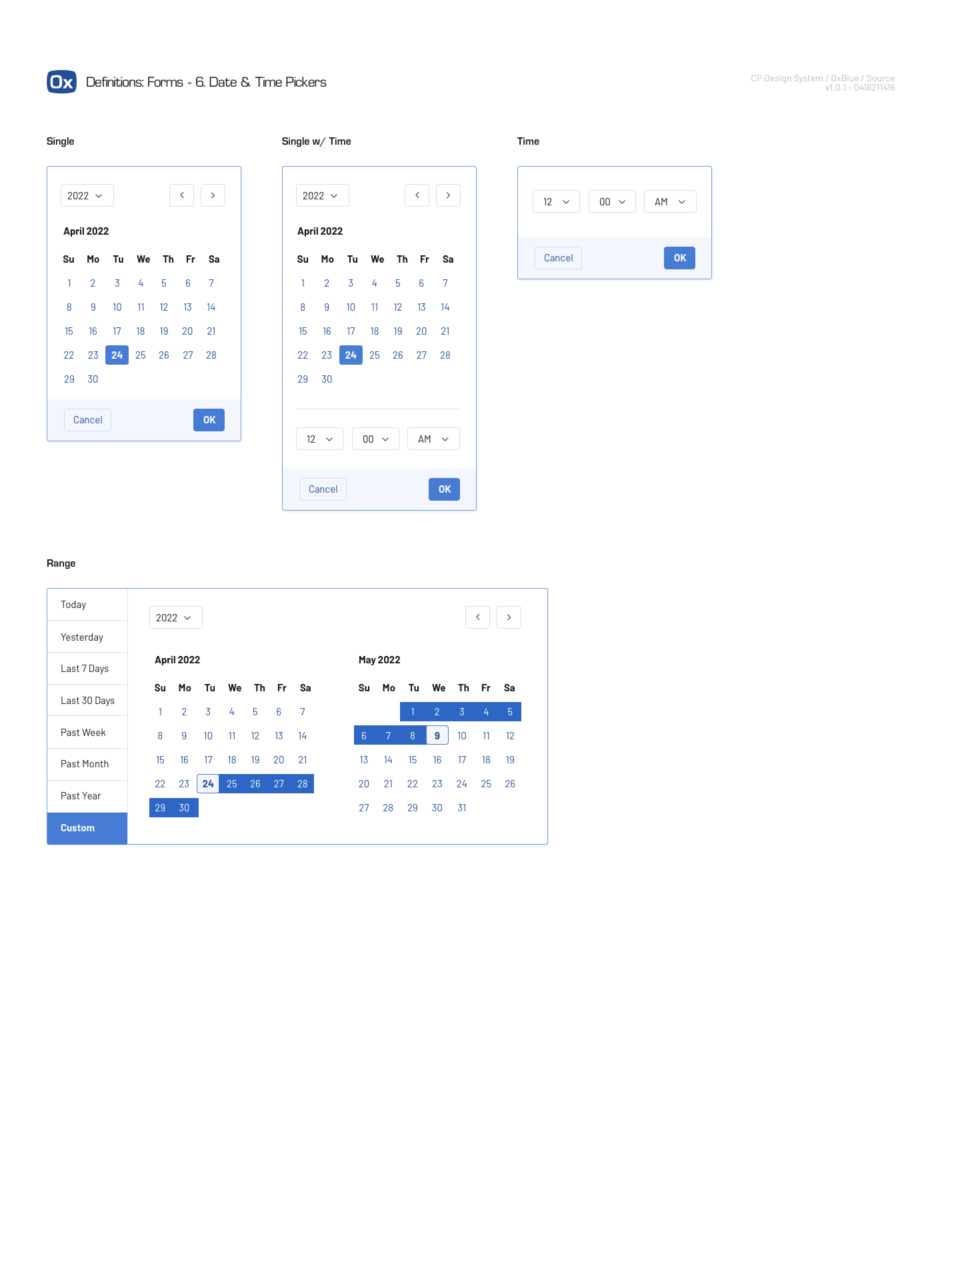 4--4.6.0.0 - Forms 6. Date & Time Pickers